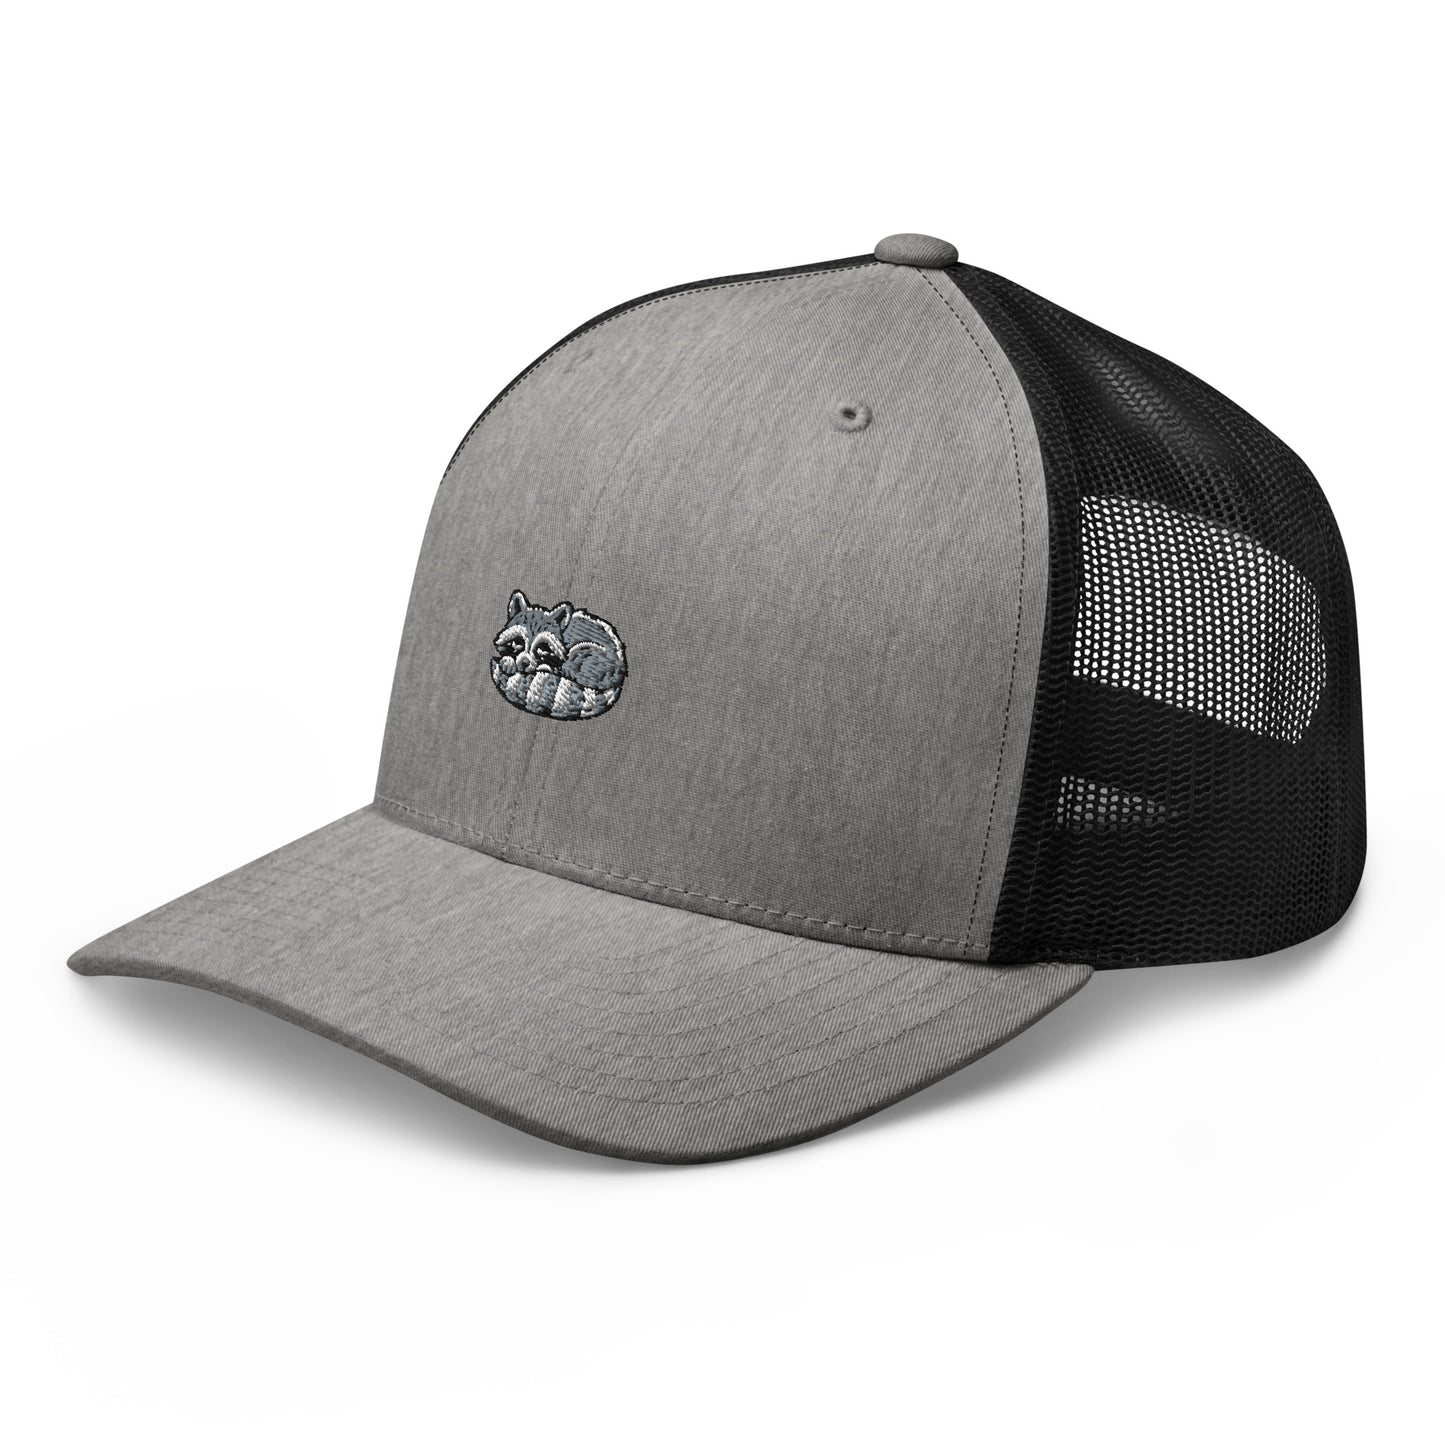  cap-from-the-front-with-raccoon-symbol